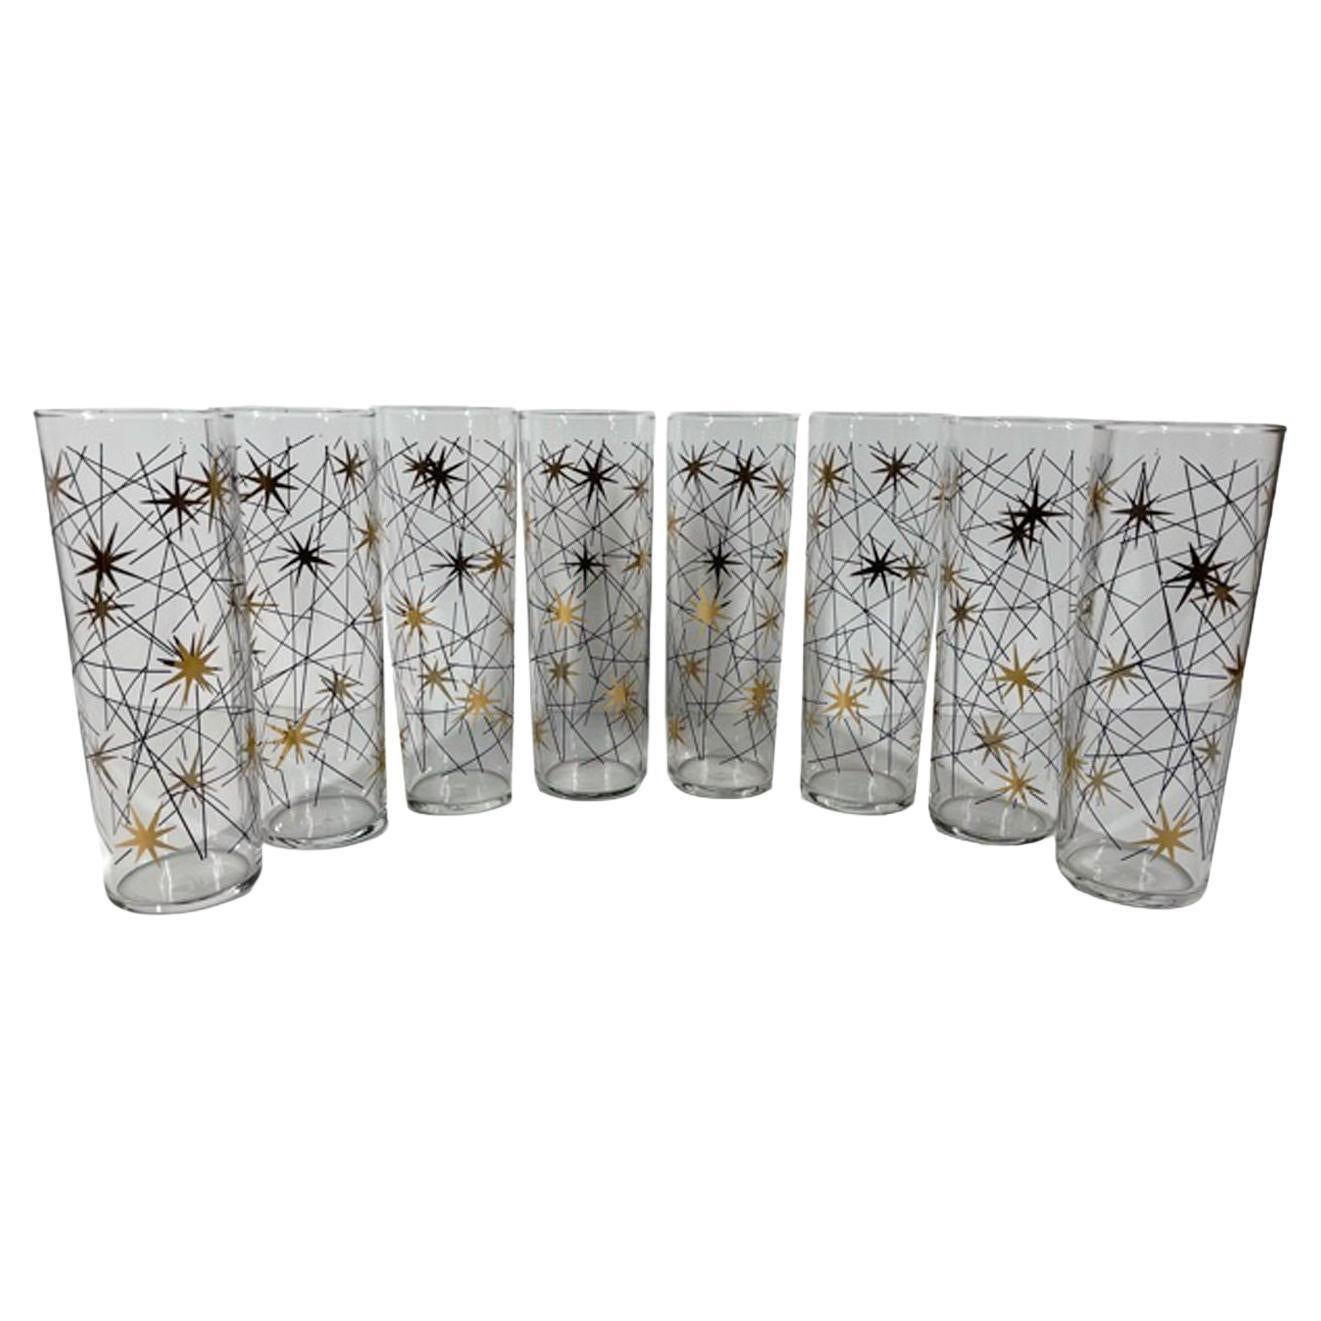 https://a.1stdibscdn.com/eight-vintage-atomic-tom-collins-glasses-with-gold-stars-and-black-enamel-lines-for-sale/f_13752/f_263027221638029299821/f_26302722_1638029300104_bg_processed.jpg